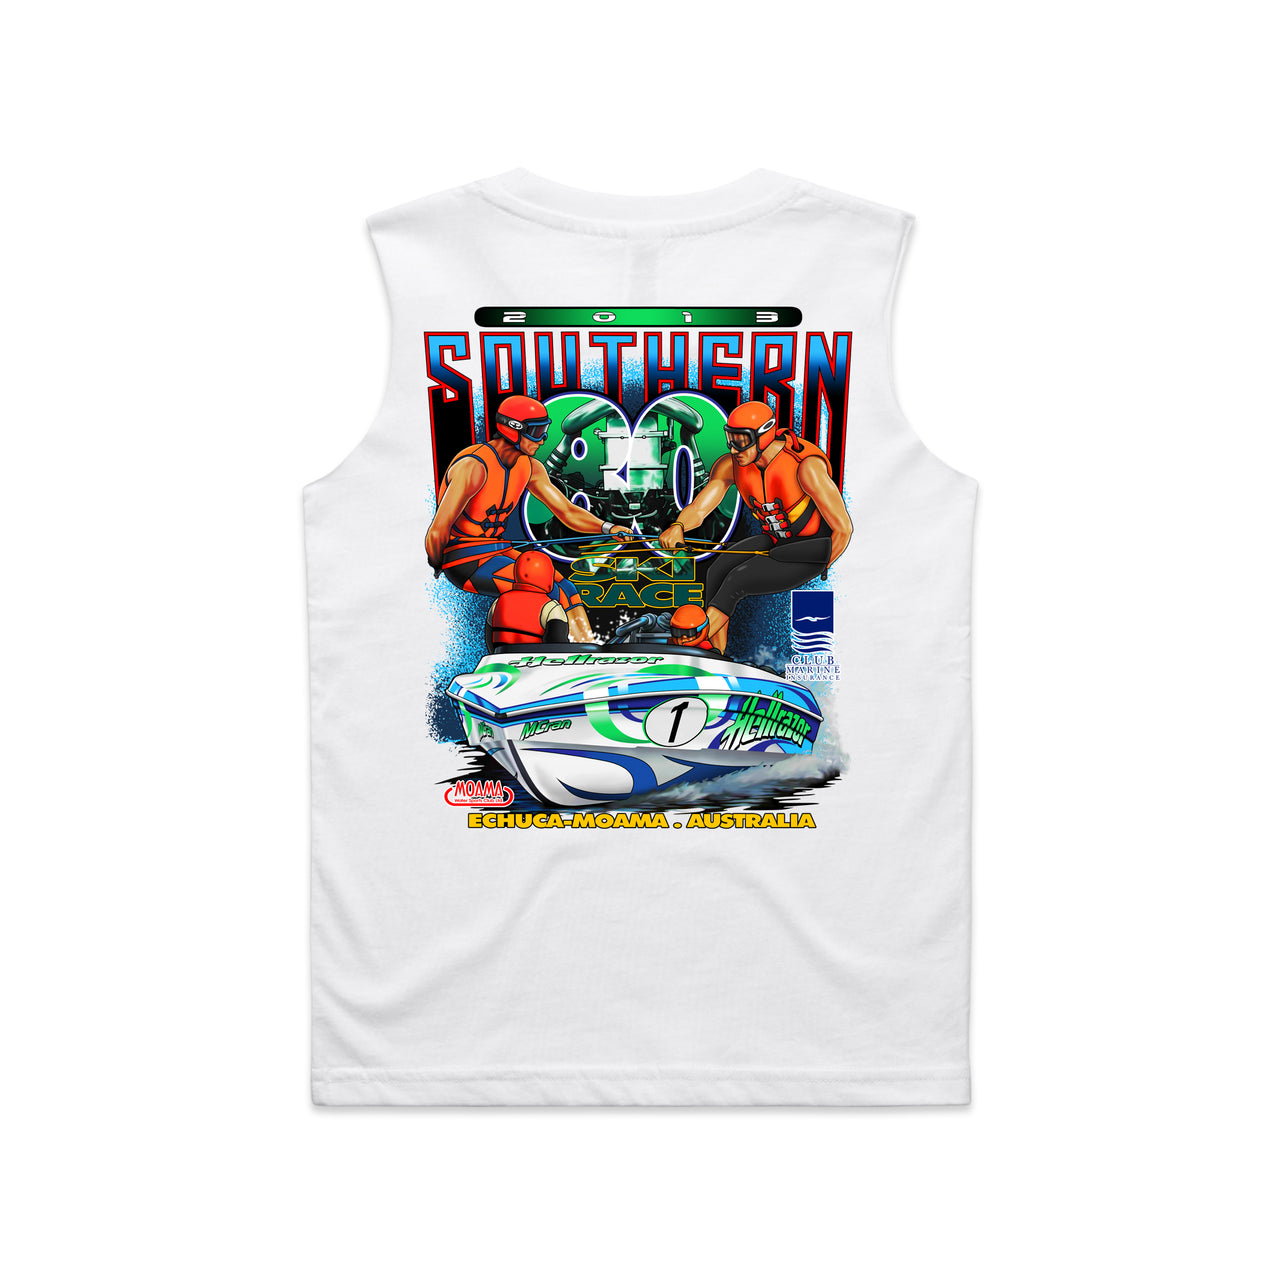 S80 2013 Hellrazor Event Youth/Kids Tank